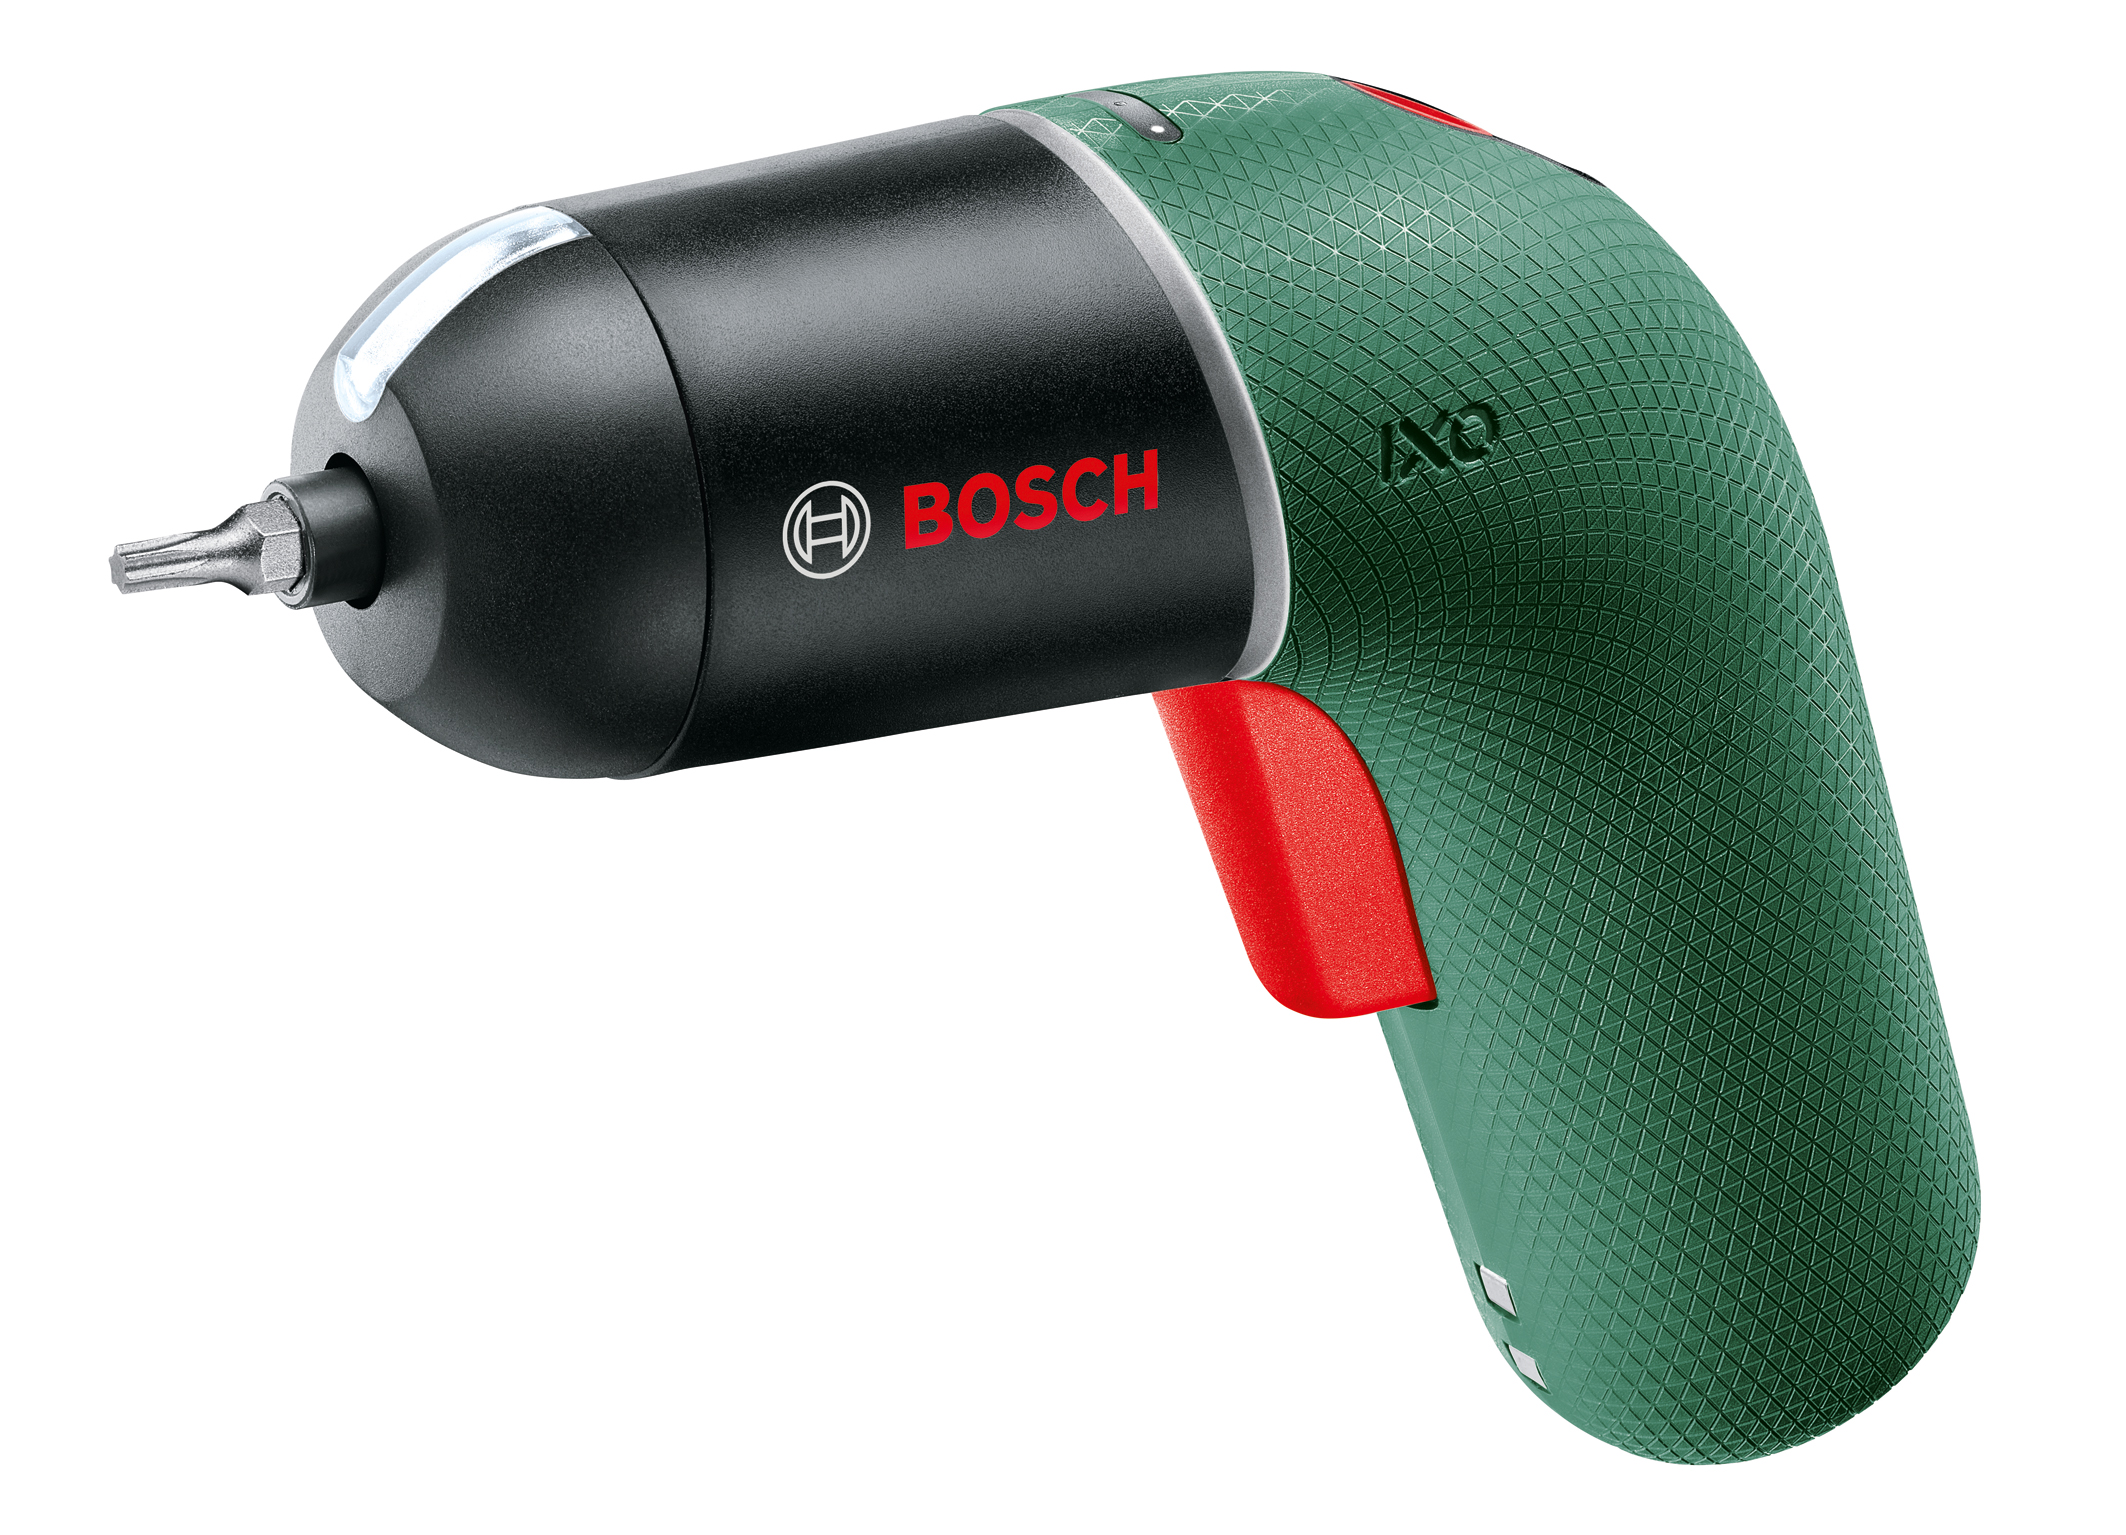 Now once again in classic Bosch Green with red control elements: The cult screwdriver Ixo Classic is back